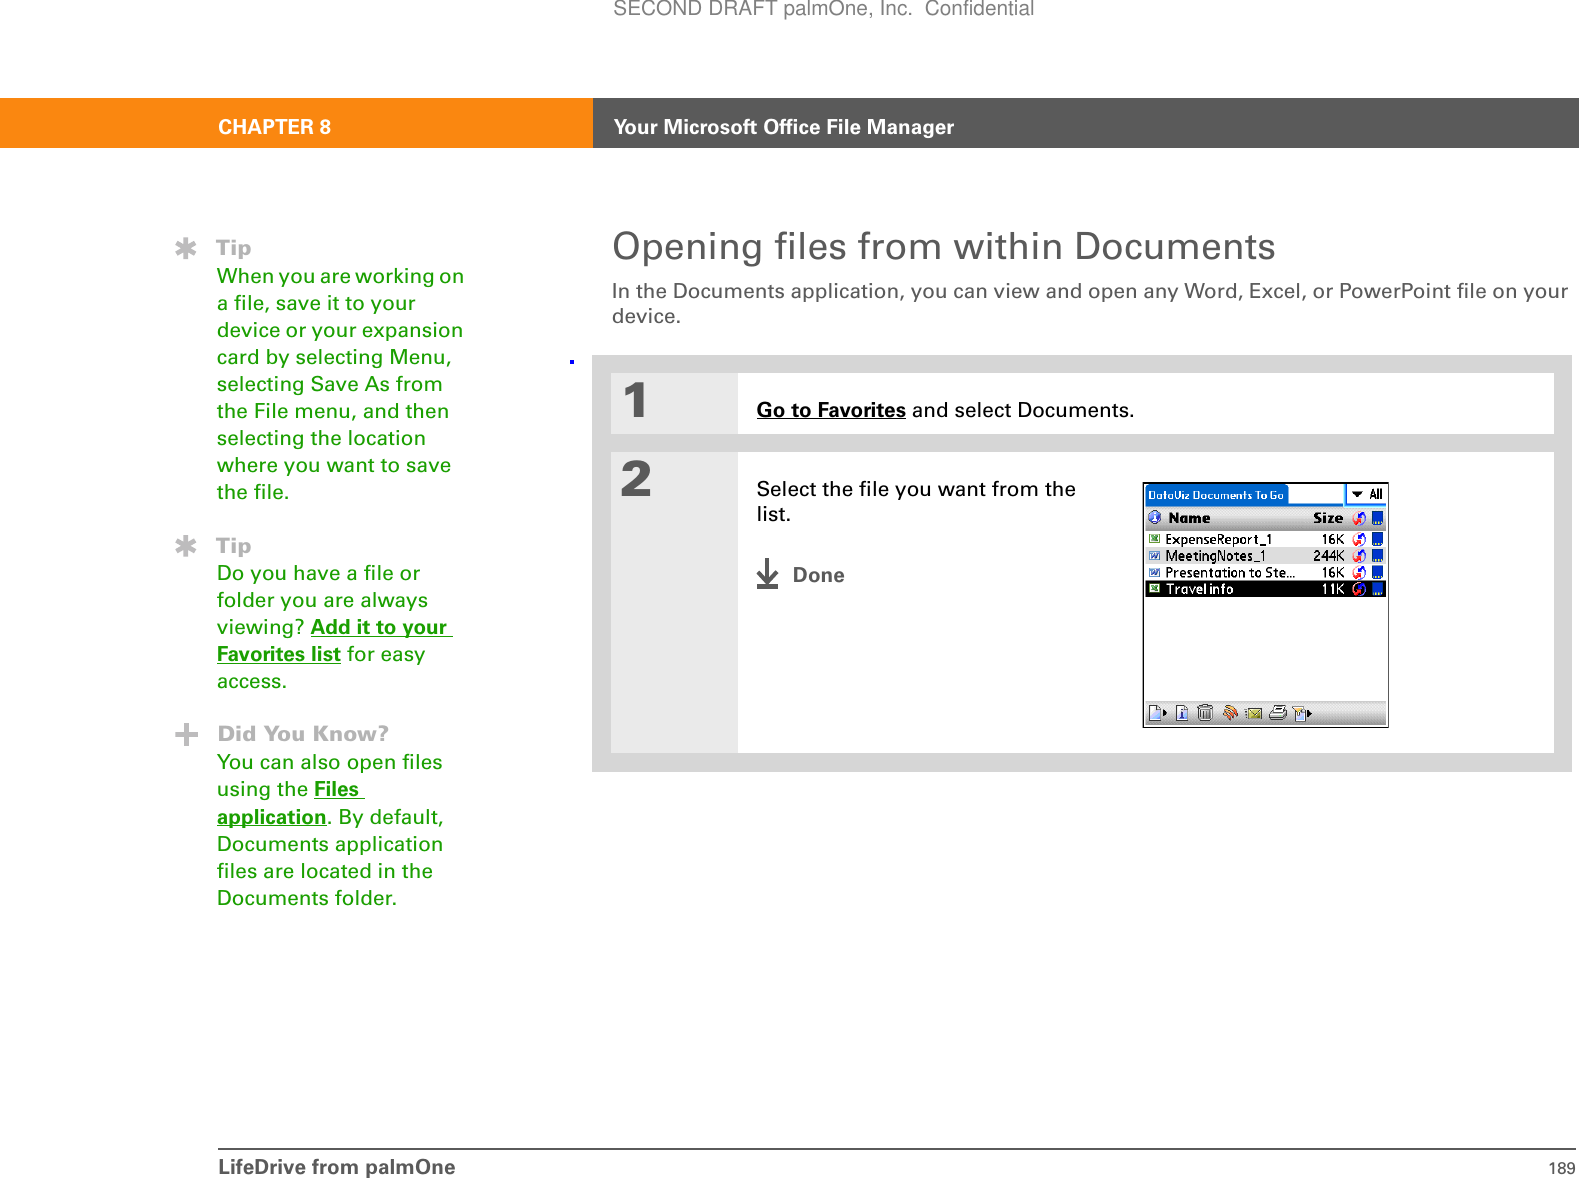 CHAPTER 8 Your Microsoft Office File ManagerLifeDrive from palmOne 189Opening files from within DocumentsIn the Documents application, you can view and open any Word, Excel, or PowerPoint file on your device.01Go to Favorites and select Documents.2Select the file you want from the list.DoneTipWhen you are working on a file, save it to your device or your expansion card by selecting Menu, selecting Save As from the File menu, and then selecting the location where you want to save the file.TipDo you have a file or folder you are always viewing? Add it to your Favorites list for easy access.Did You Know?You can also open files using the Files application. By default, Documents application files are located in the Documents folder.SECOND DRAFT palmOne, Inc.  Confidential